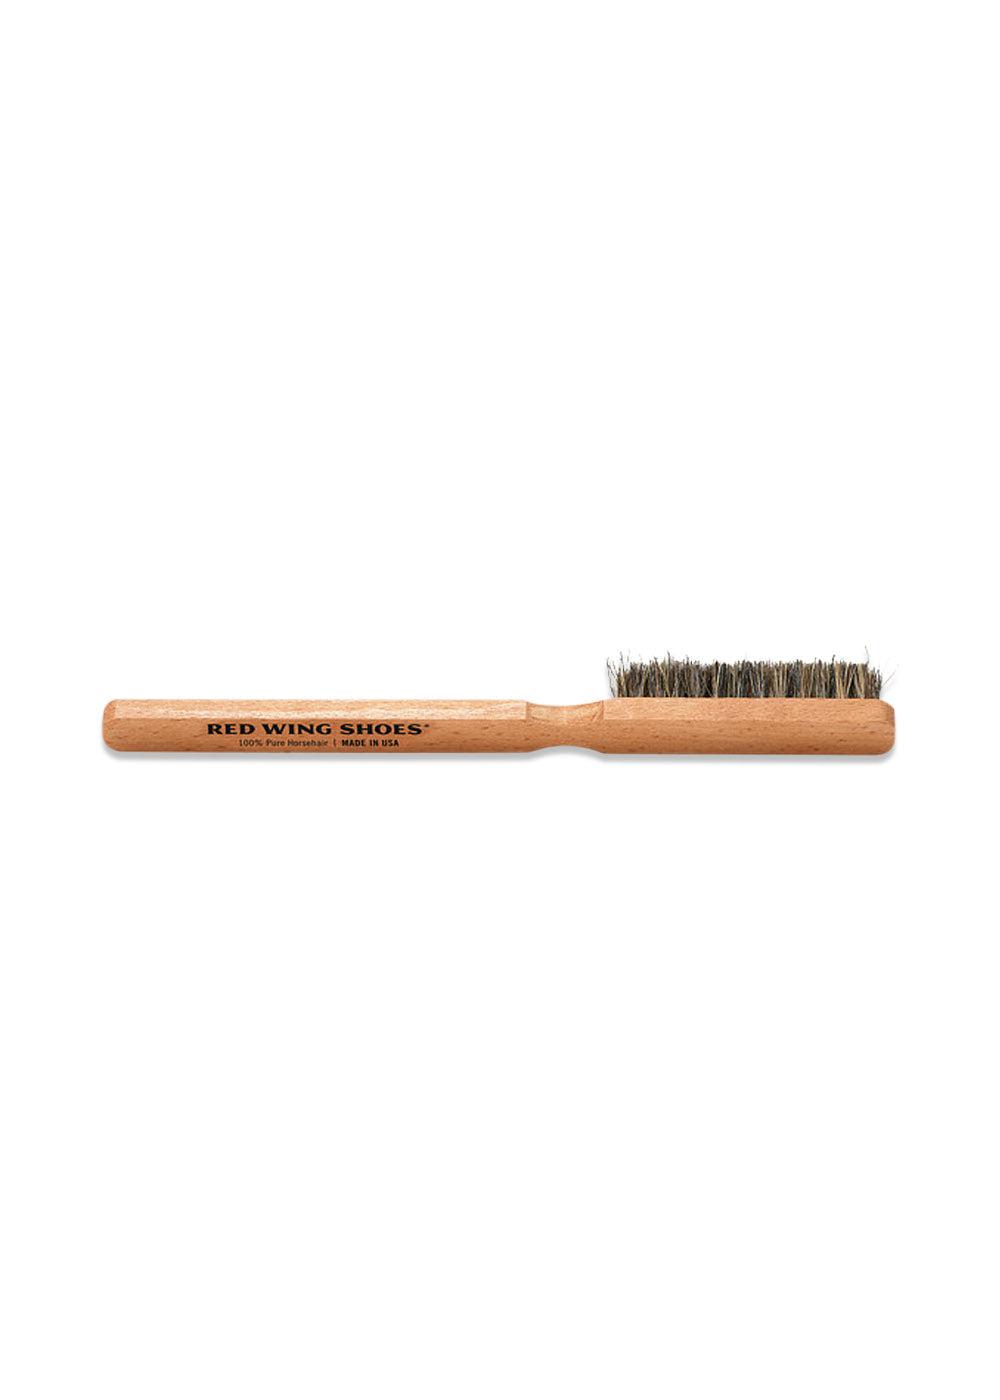 Red Wings Welt Brush -. Køb accessories her.